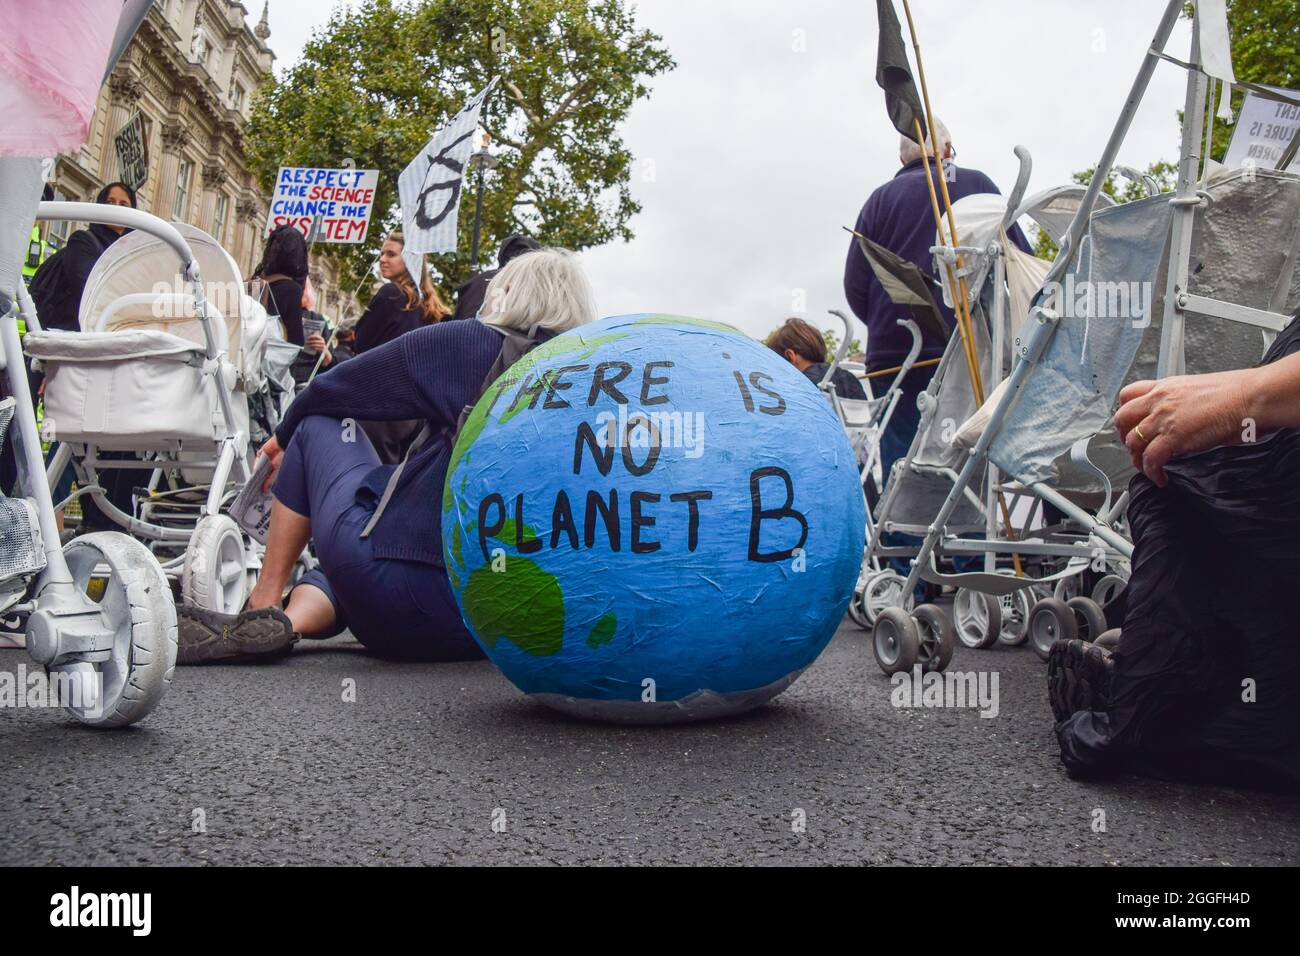 London, United Kingdom. 31st August 2021. Protesters outside Downing Street. Extinction Rebellion protesters dressed in black marched with prams in Westminster as part of their two-week Impossible Rebellion campaign. (Credit: Vuk Valcic / Alamy Live News) Stock Photo